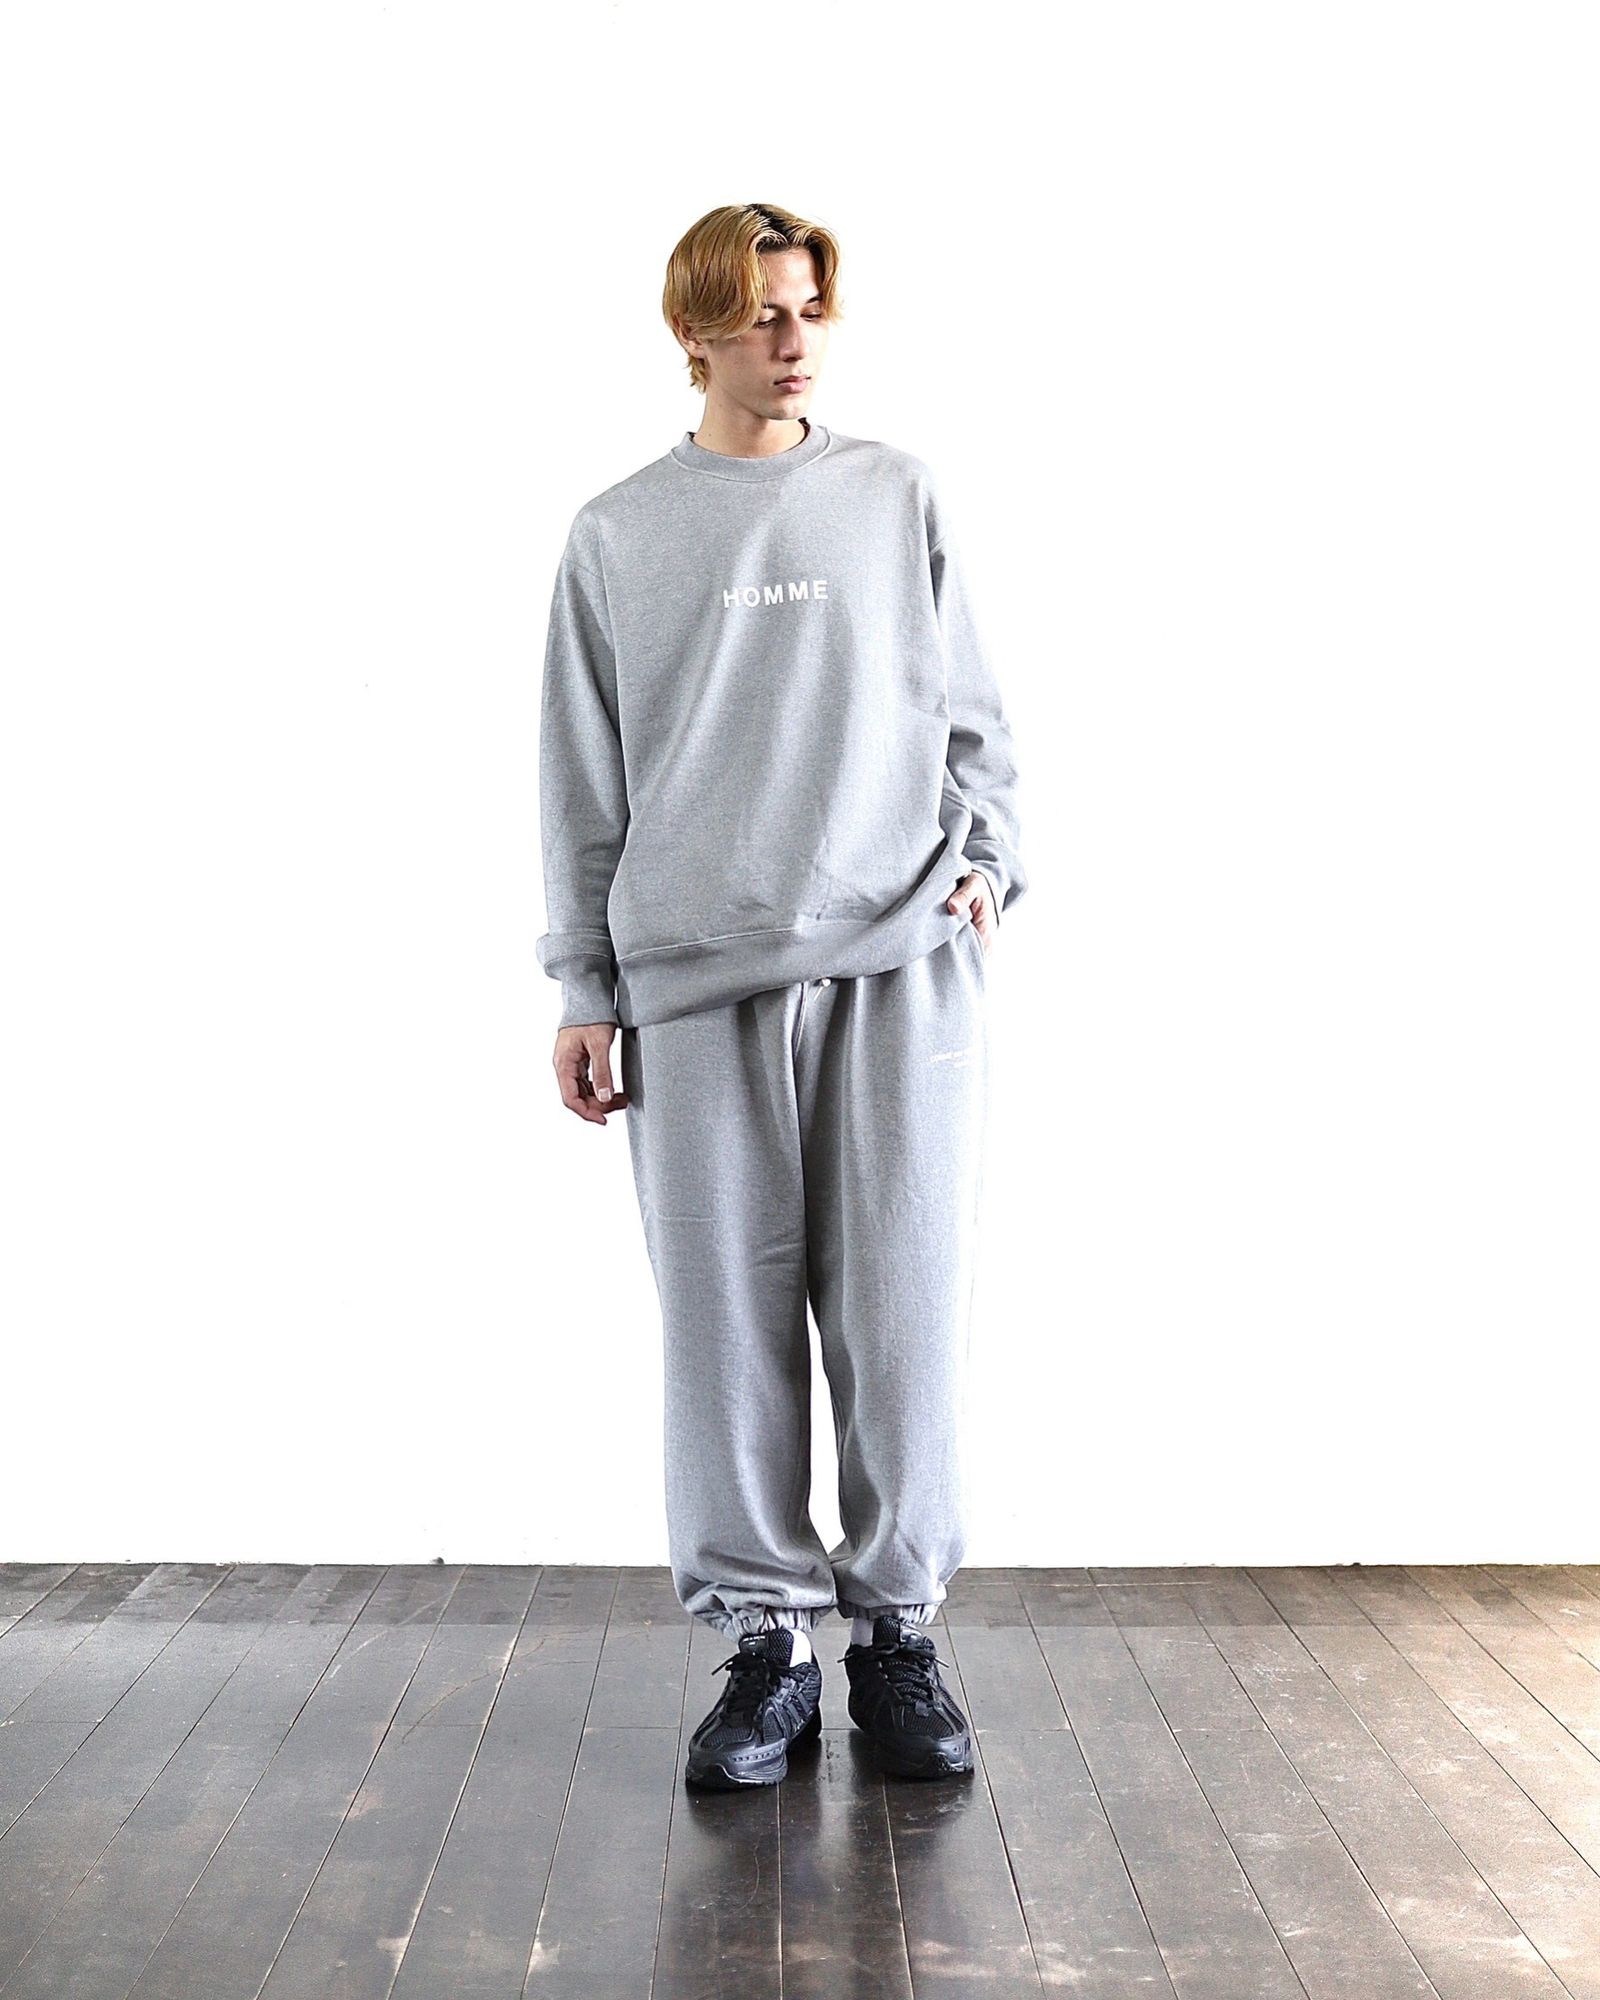 COMME des GARCONS HOMME 24SS HOMMEプリントスウェット スタイル 